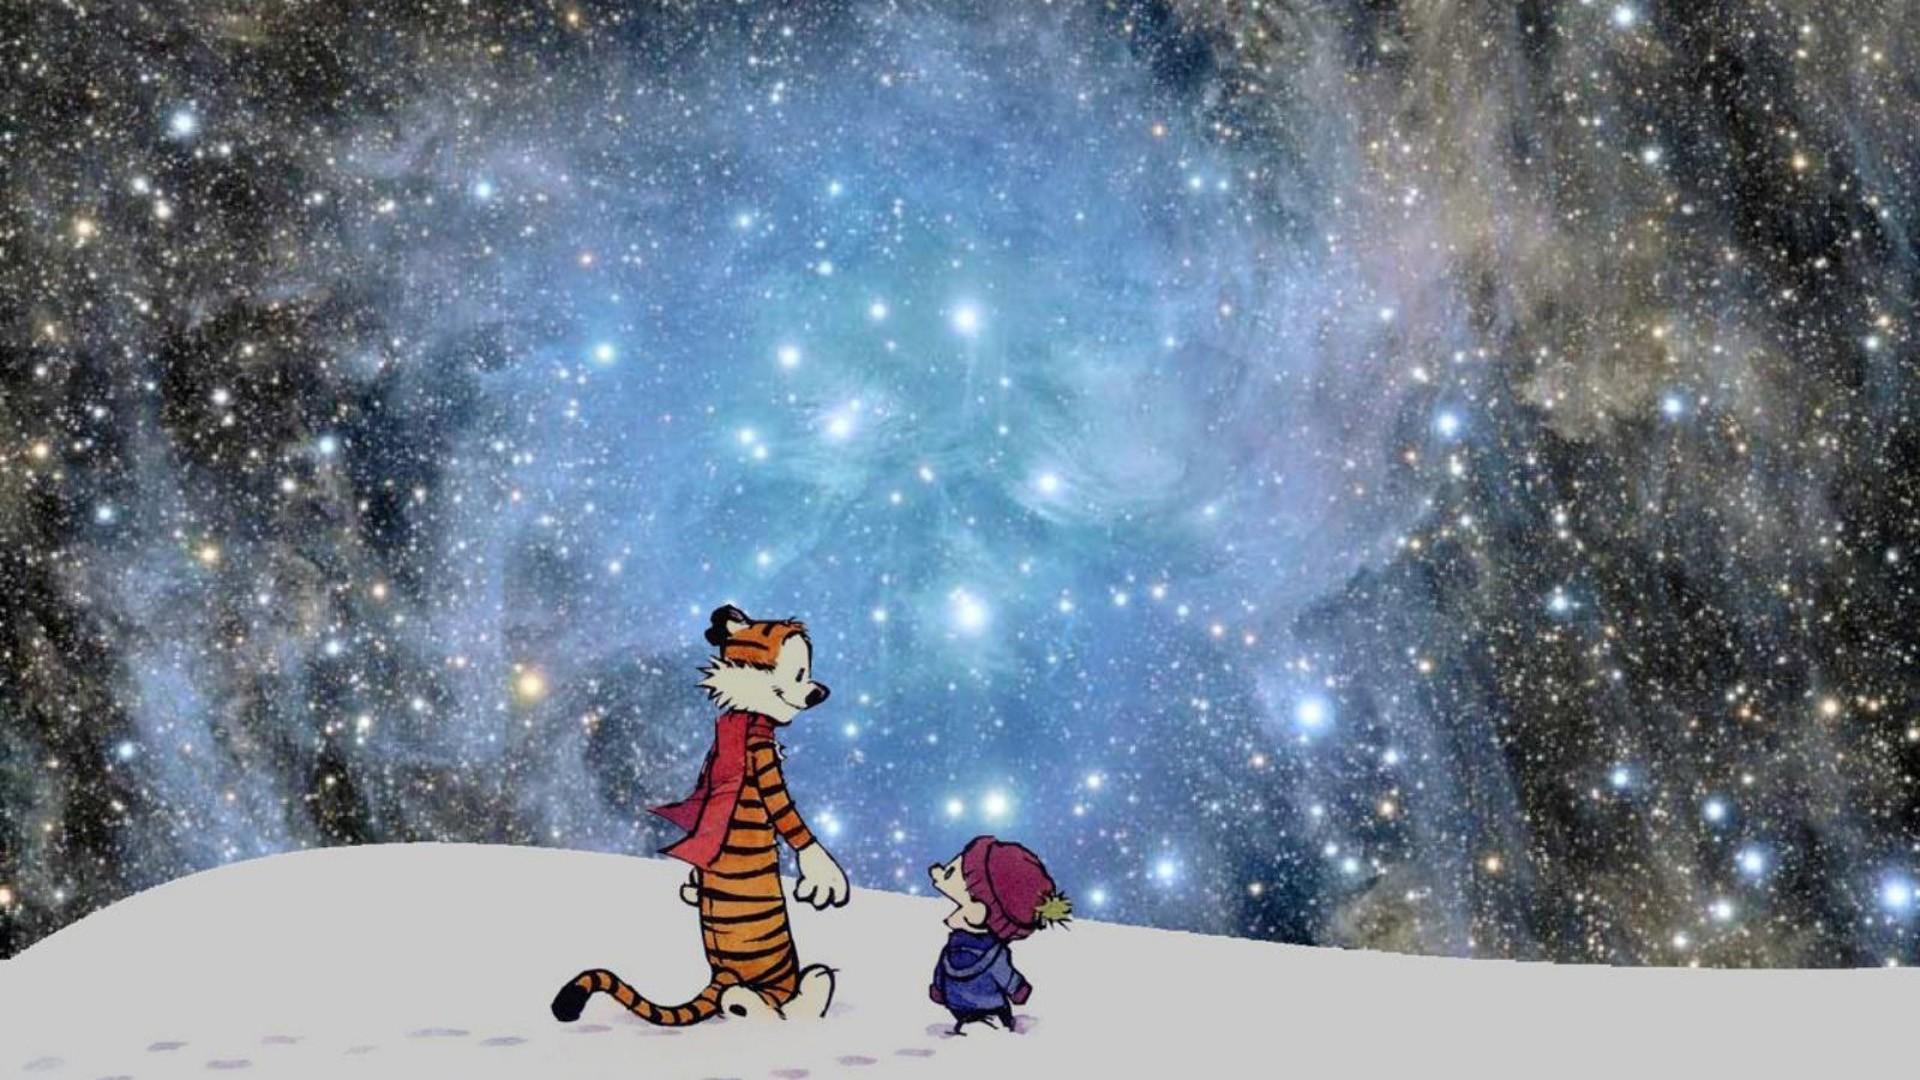 outer space calvin and hobbes Wallpaper